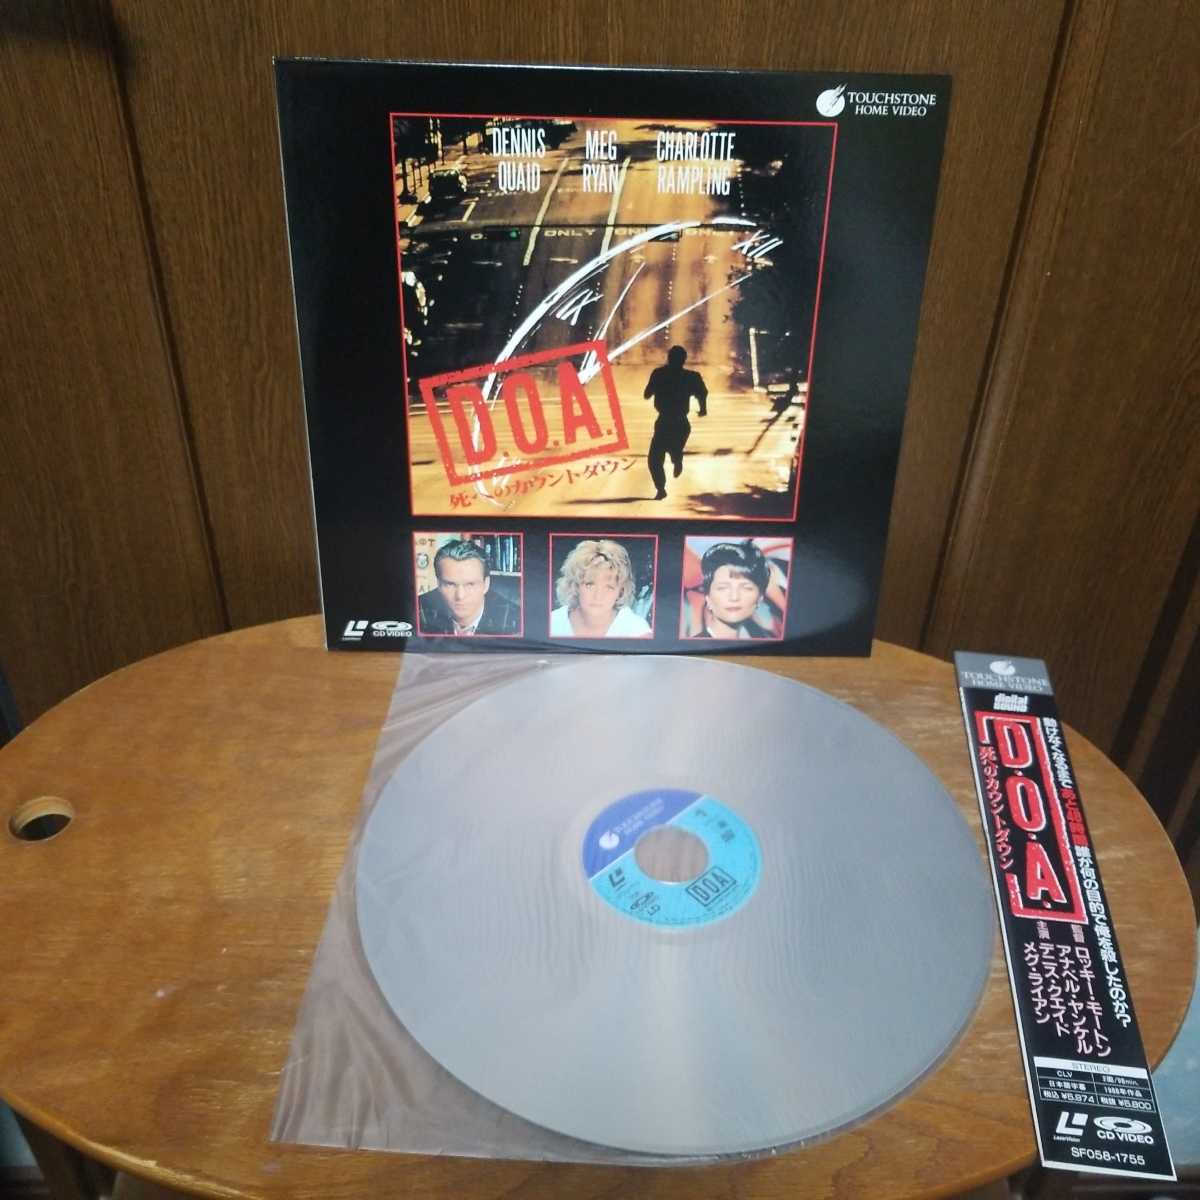 D.O.A. to count down used laser disk 